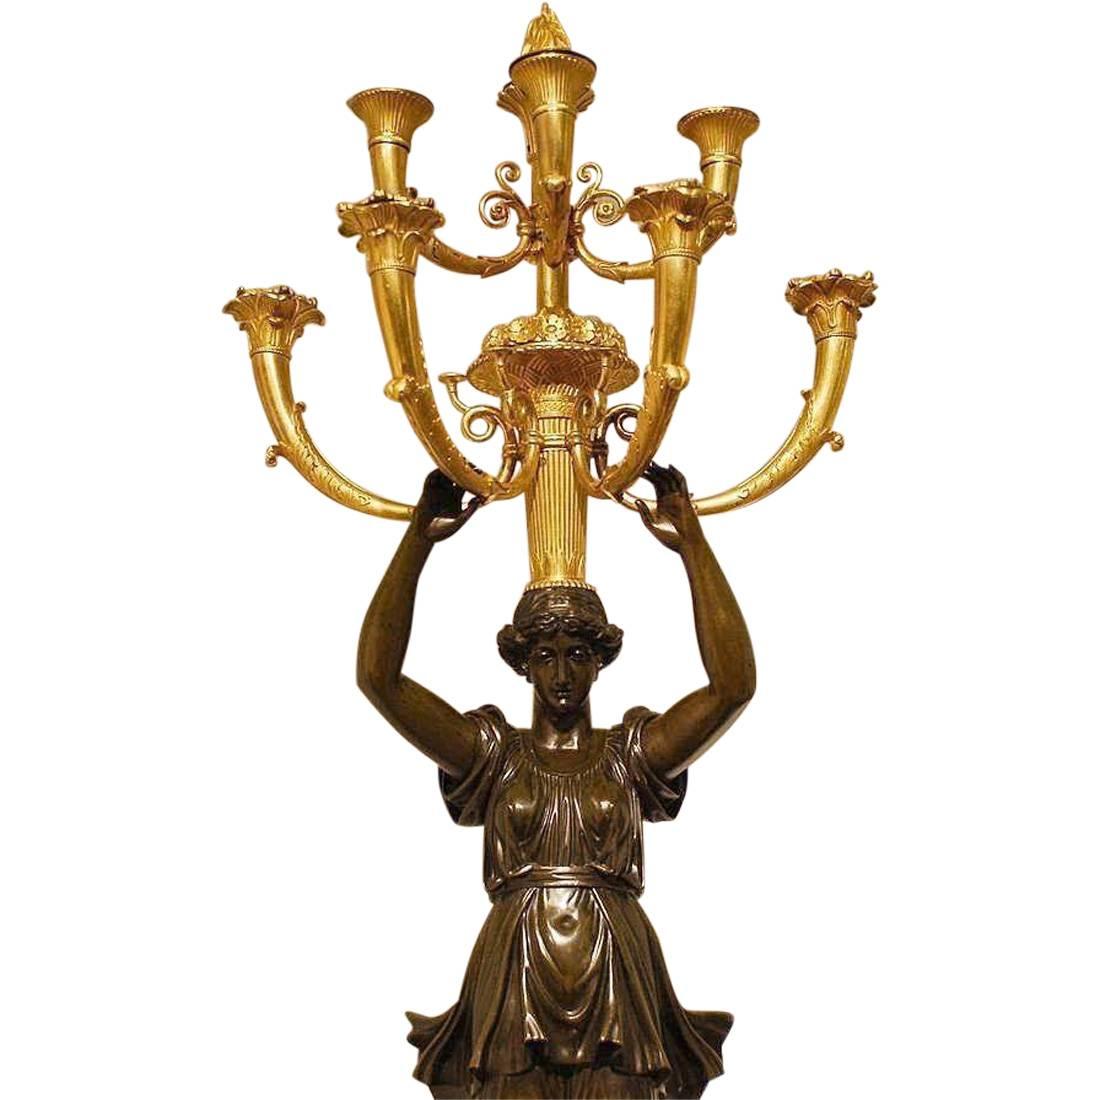 Important French Empire ormolu and patinated bronze palace sized candelabra from the early 19th century, one of a few known to exist. 

The plinth is solid Rouge Royal Marble on a gilt bronze base. Mounted on all sides are detailed ormolu reliefs,